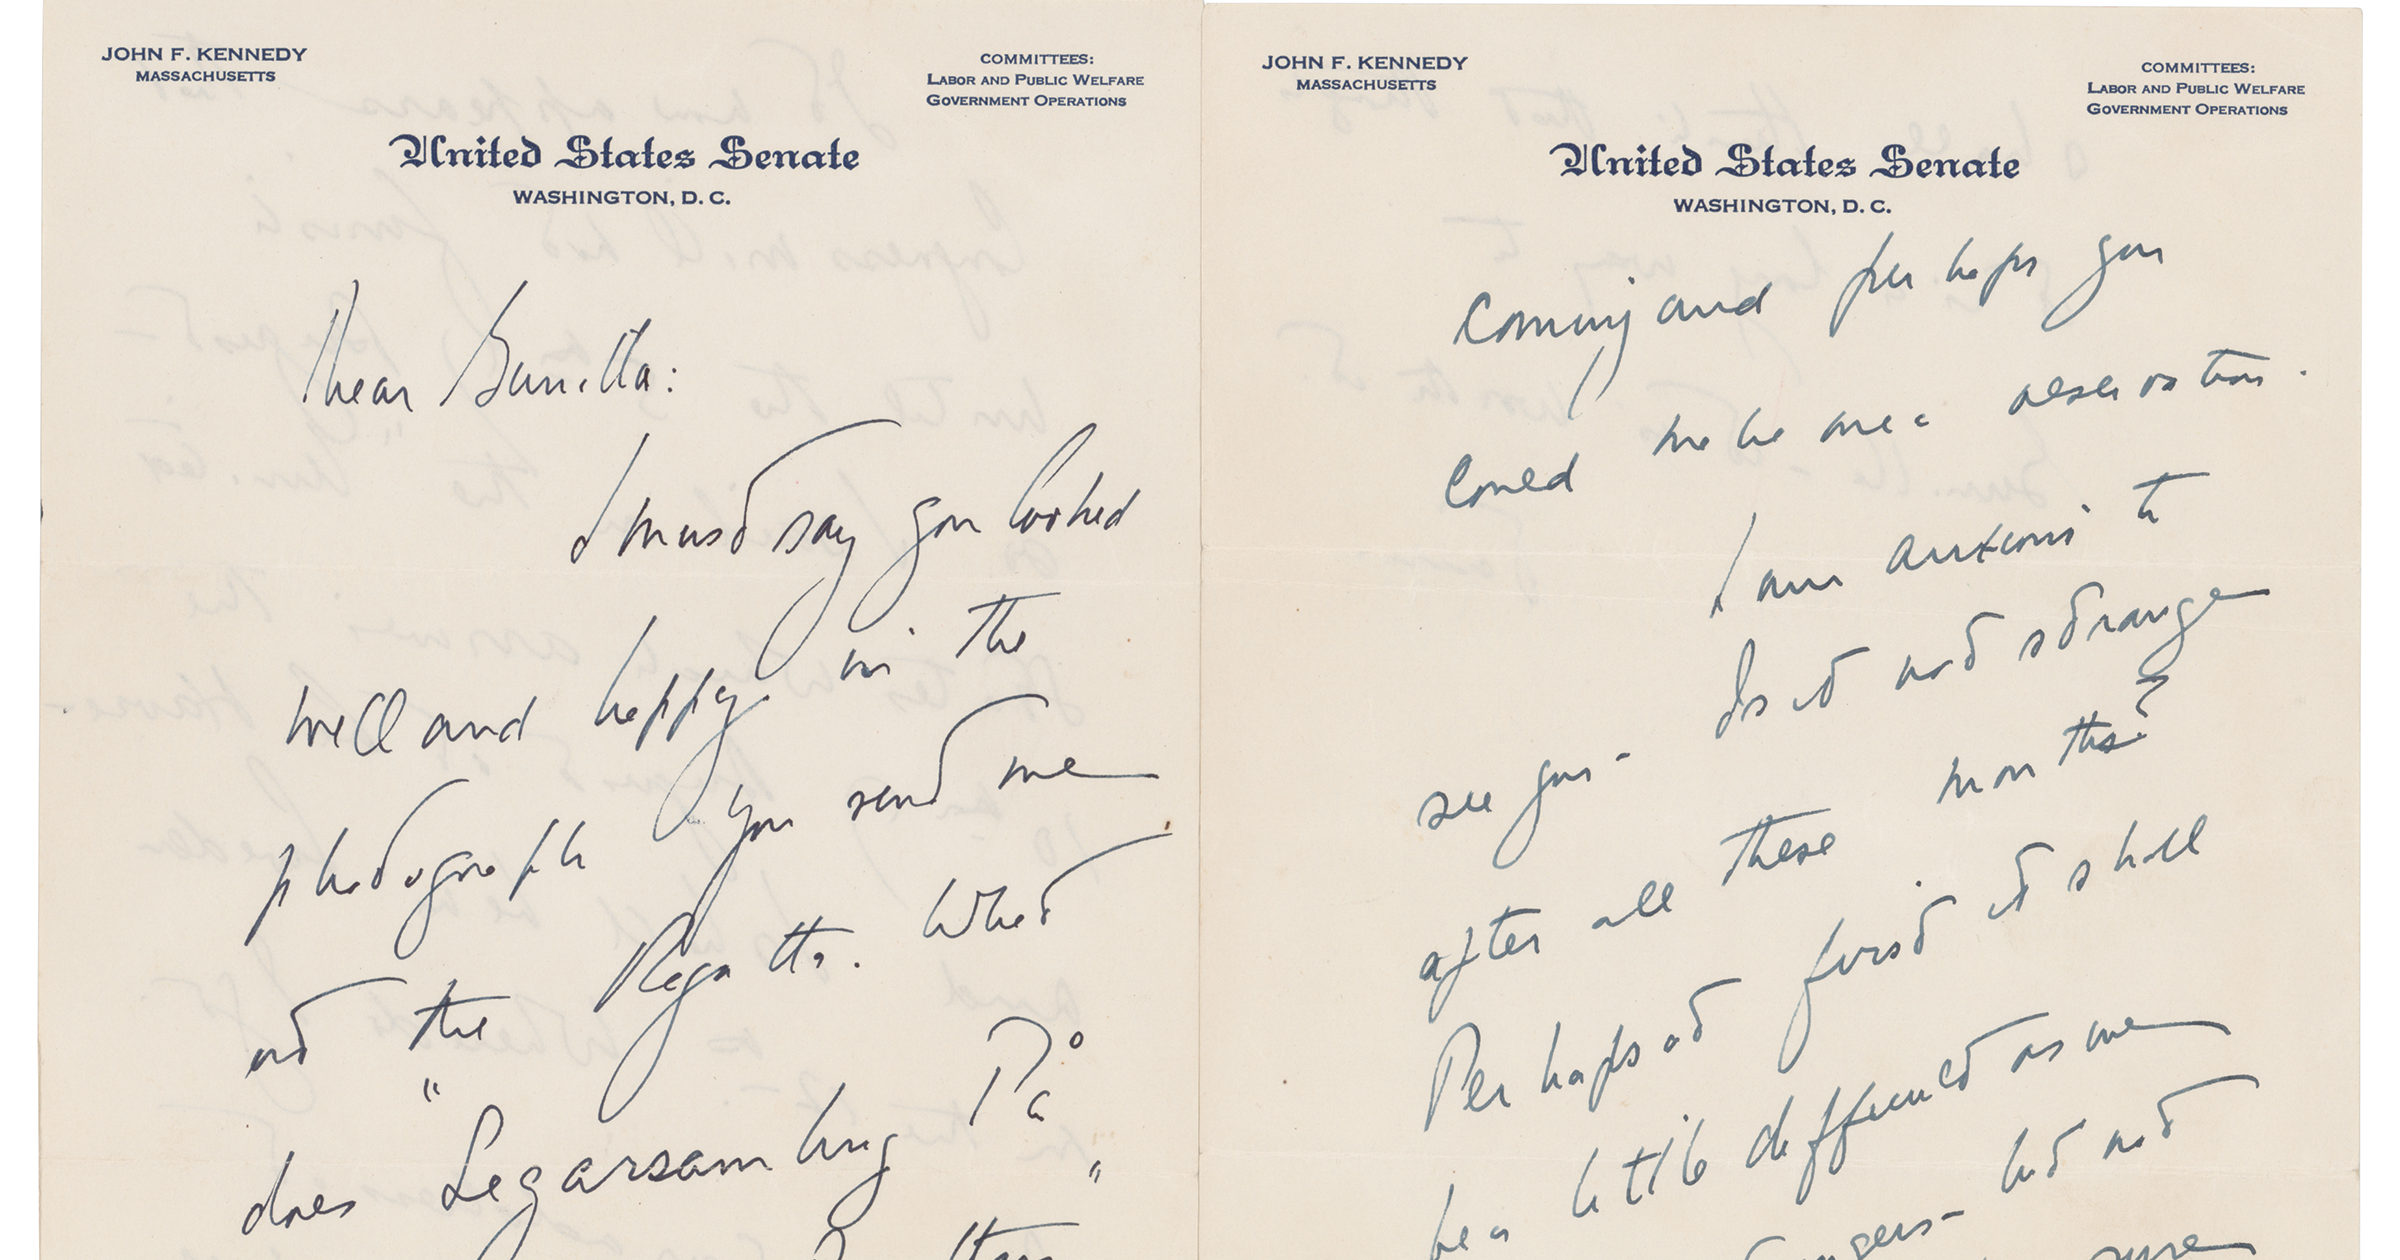 A letter from John F. Kennedy to a Swedish paramour is seen in this photo.